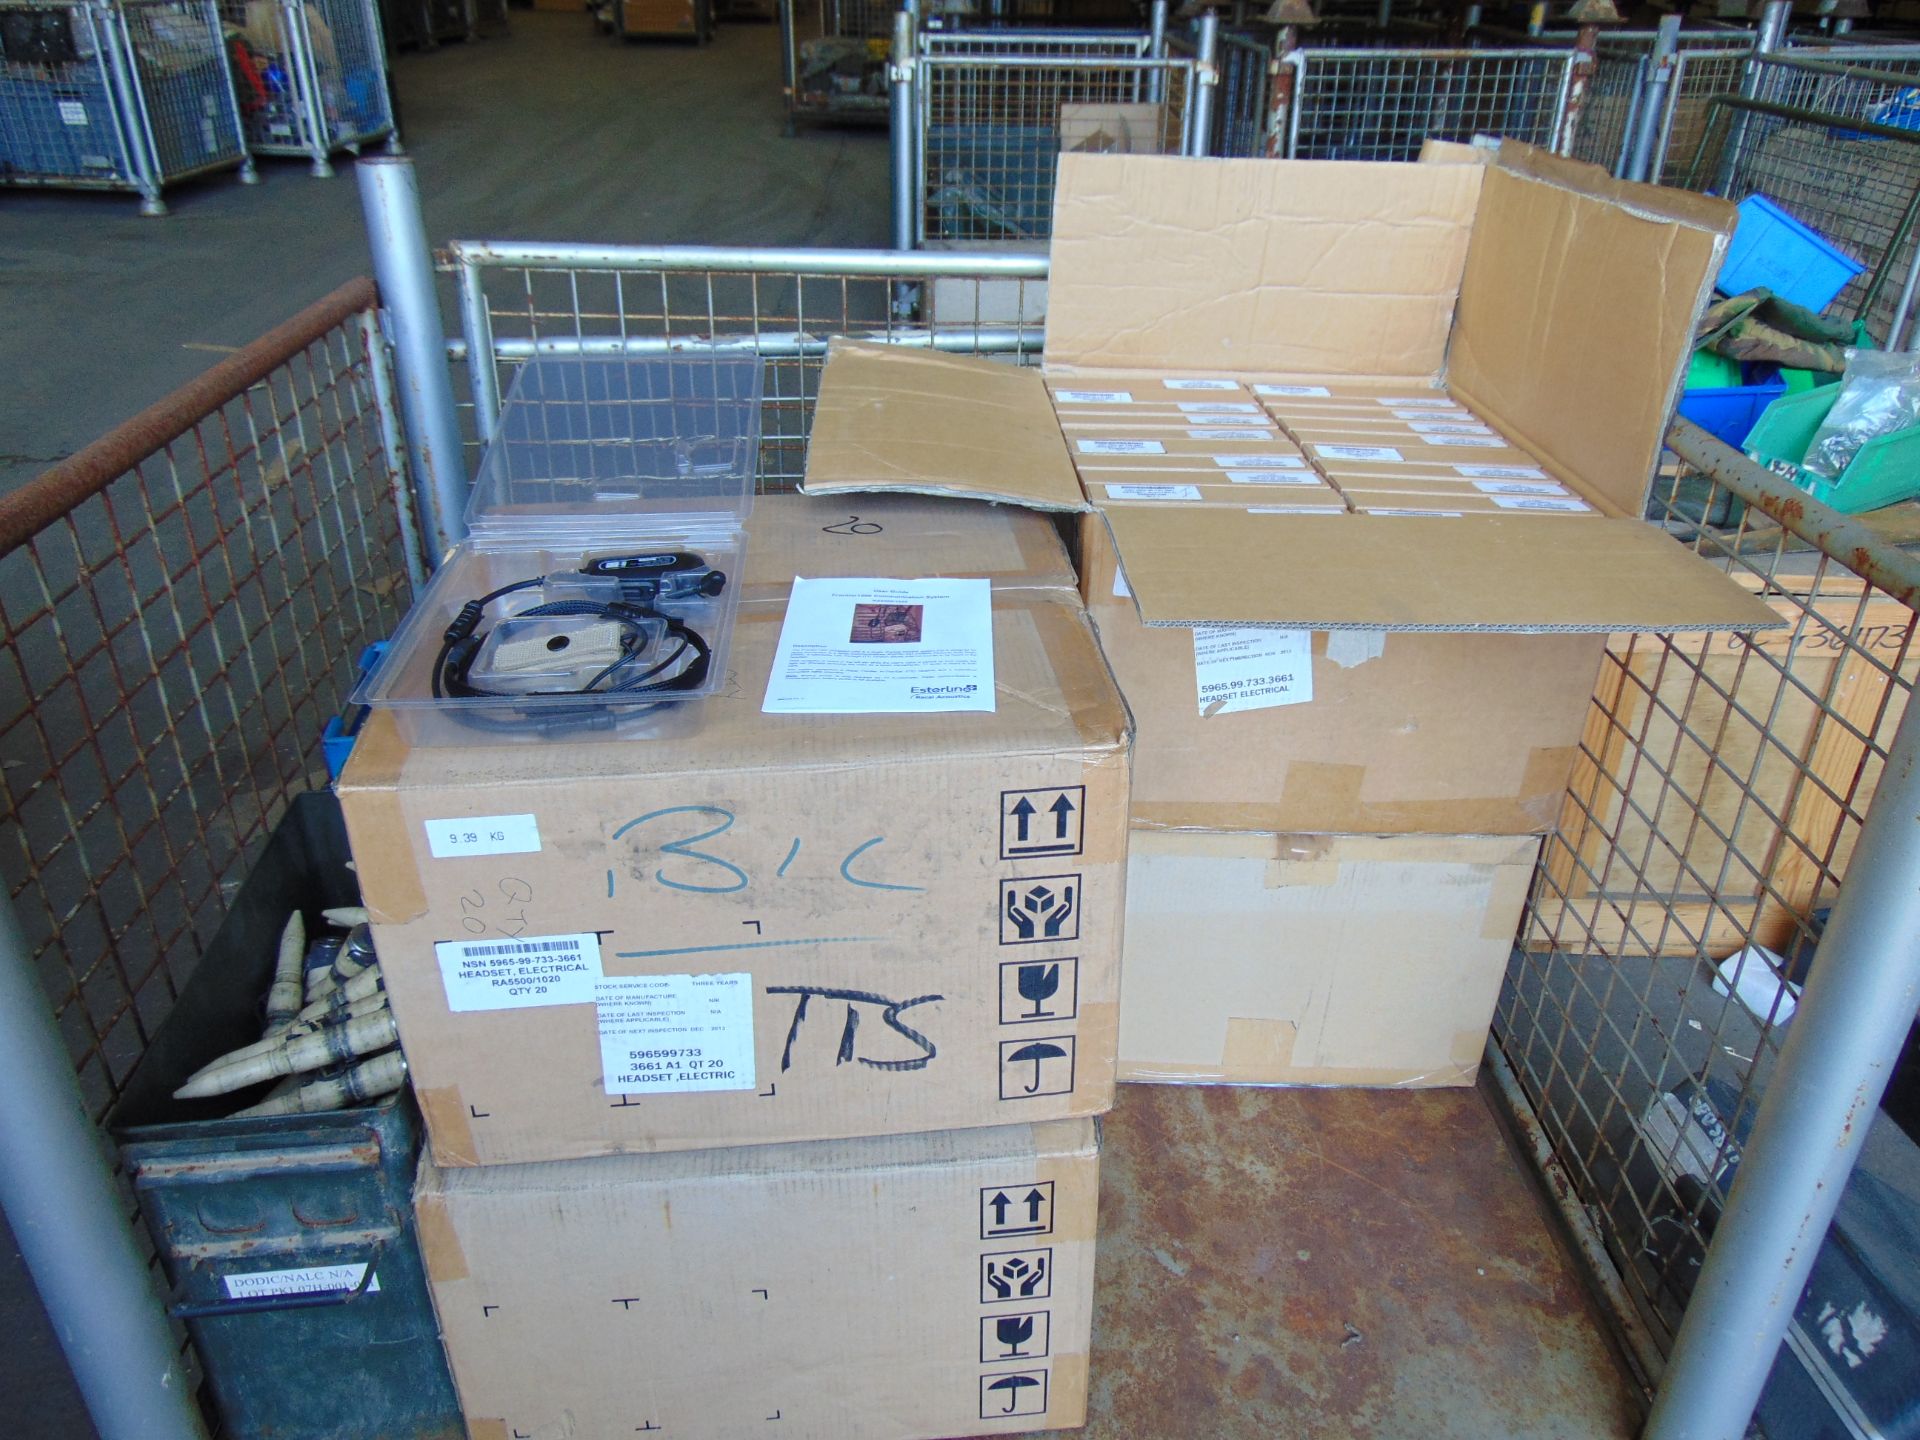 80 x New Unissued Frontier 1000 Clansman / Bowman Headset, (4 Boxes x 20), Original Packing - Image 2 of 7